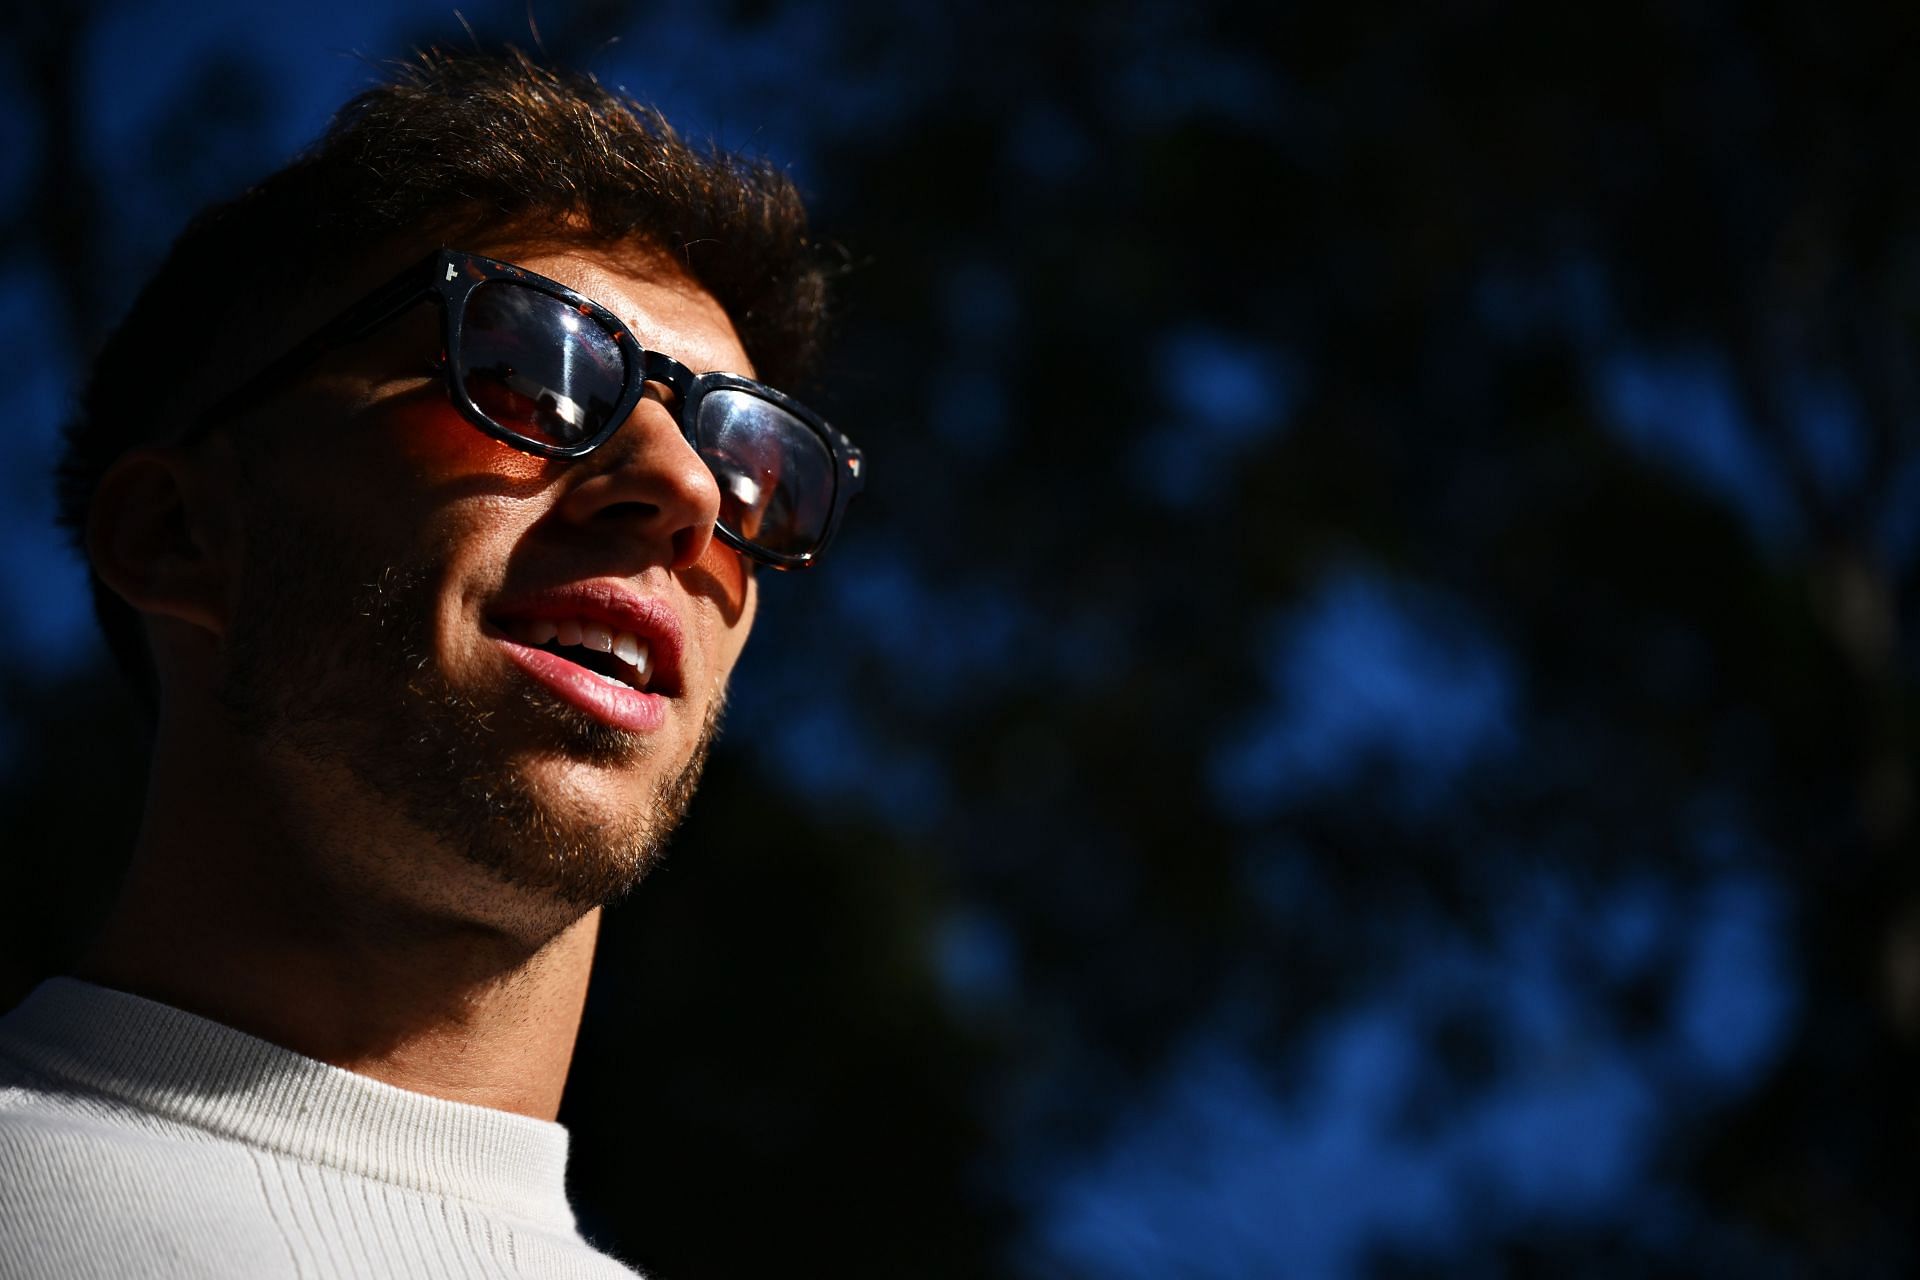 MELBOURNE, AUSTRALIA - APRIL 07: Pierre Gasly of France and Scuderia AlphaTauri looks on in the Paddock during previews ahead of the F1 Grand Prix of Australia at Melbourne Grand Prix Circuit on April 07, 2022 in Melbourne, Australia. (Photo by Clive Mason/Getty Images)